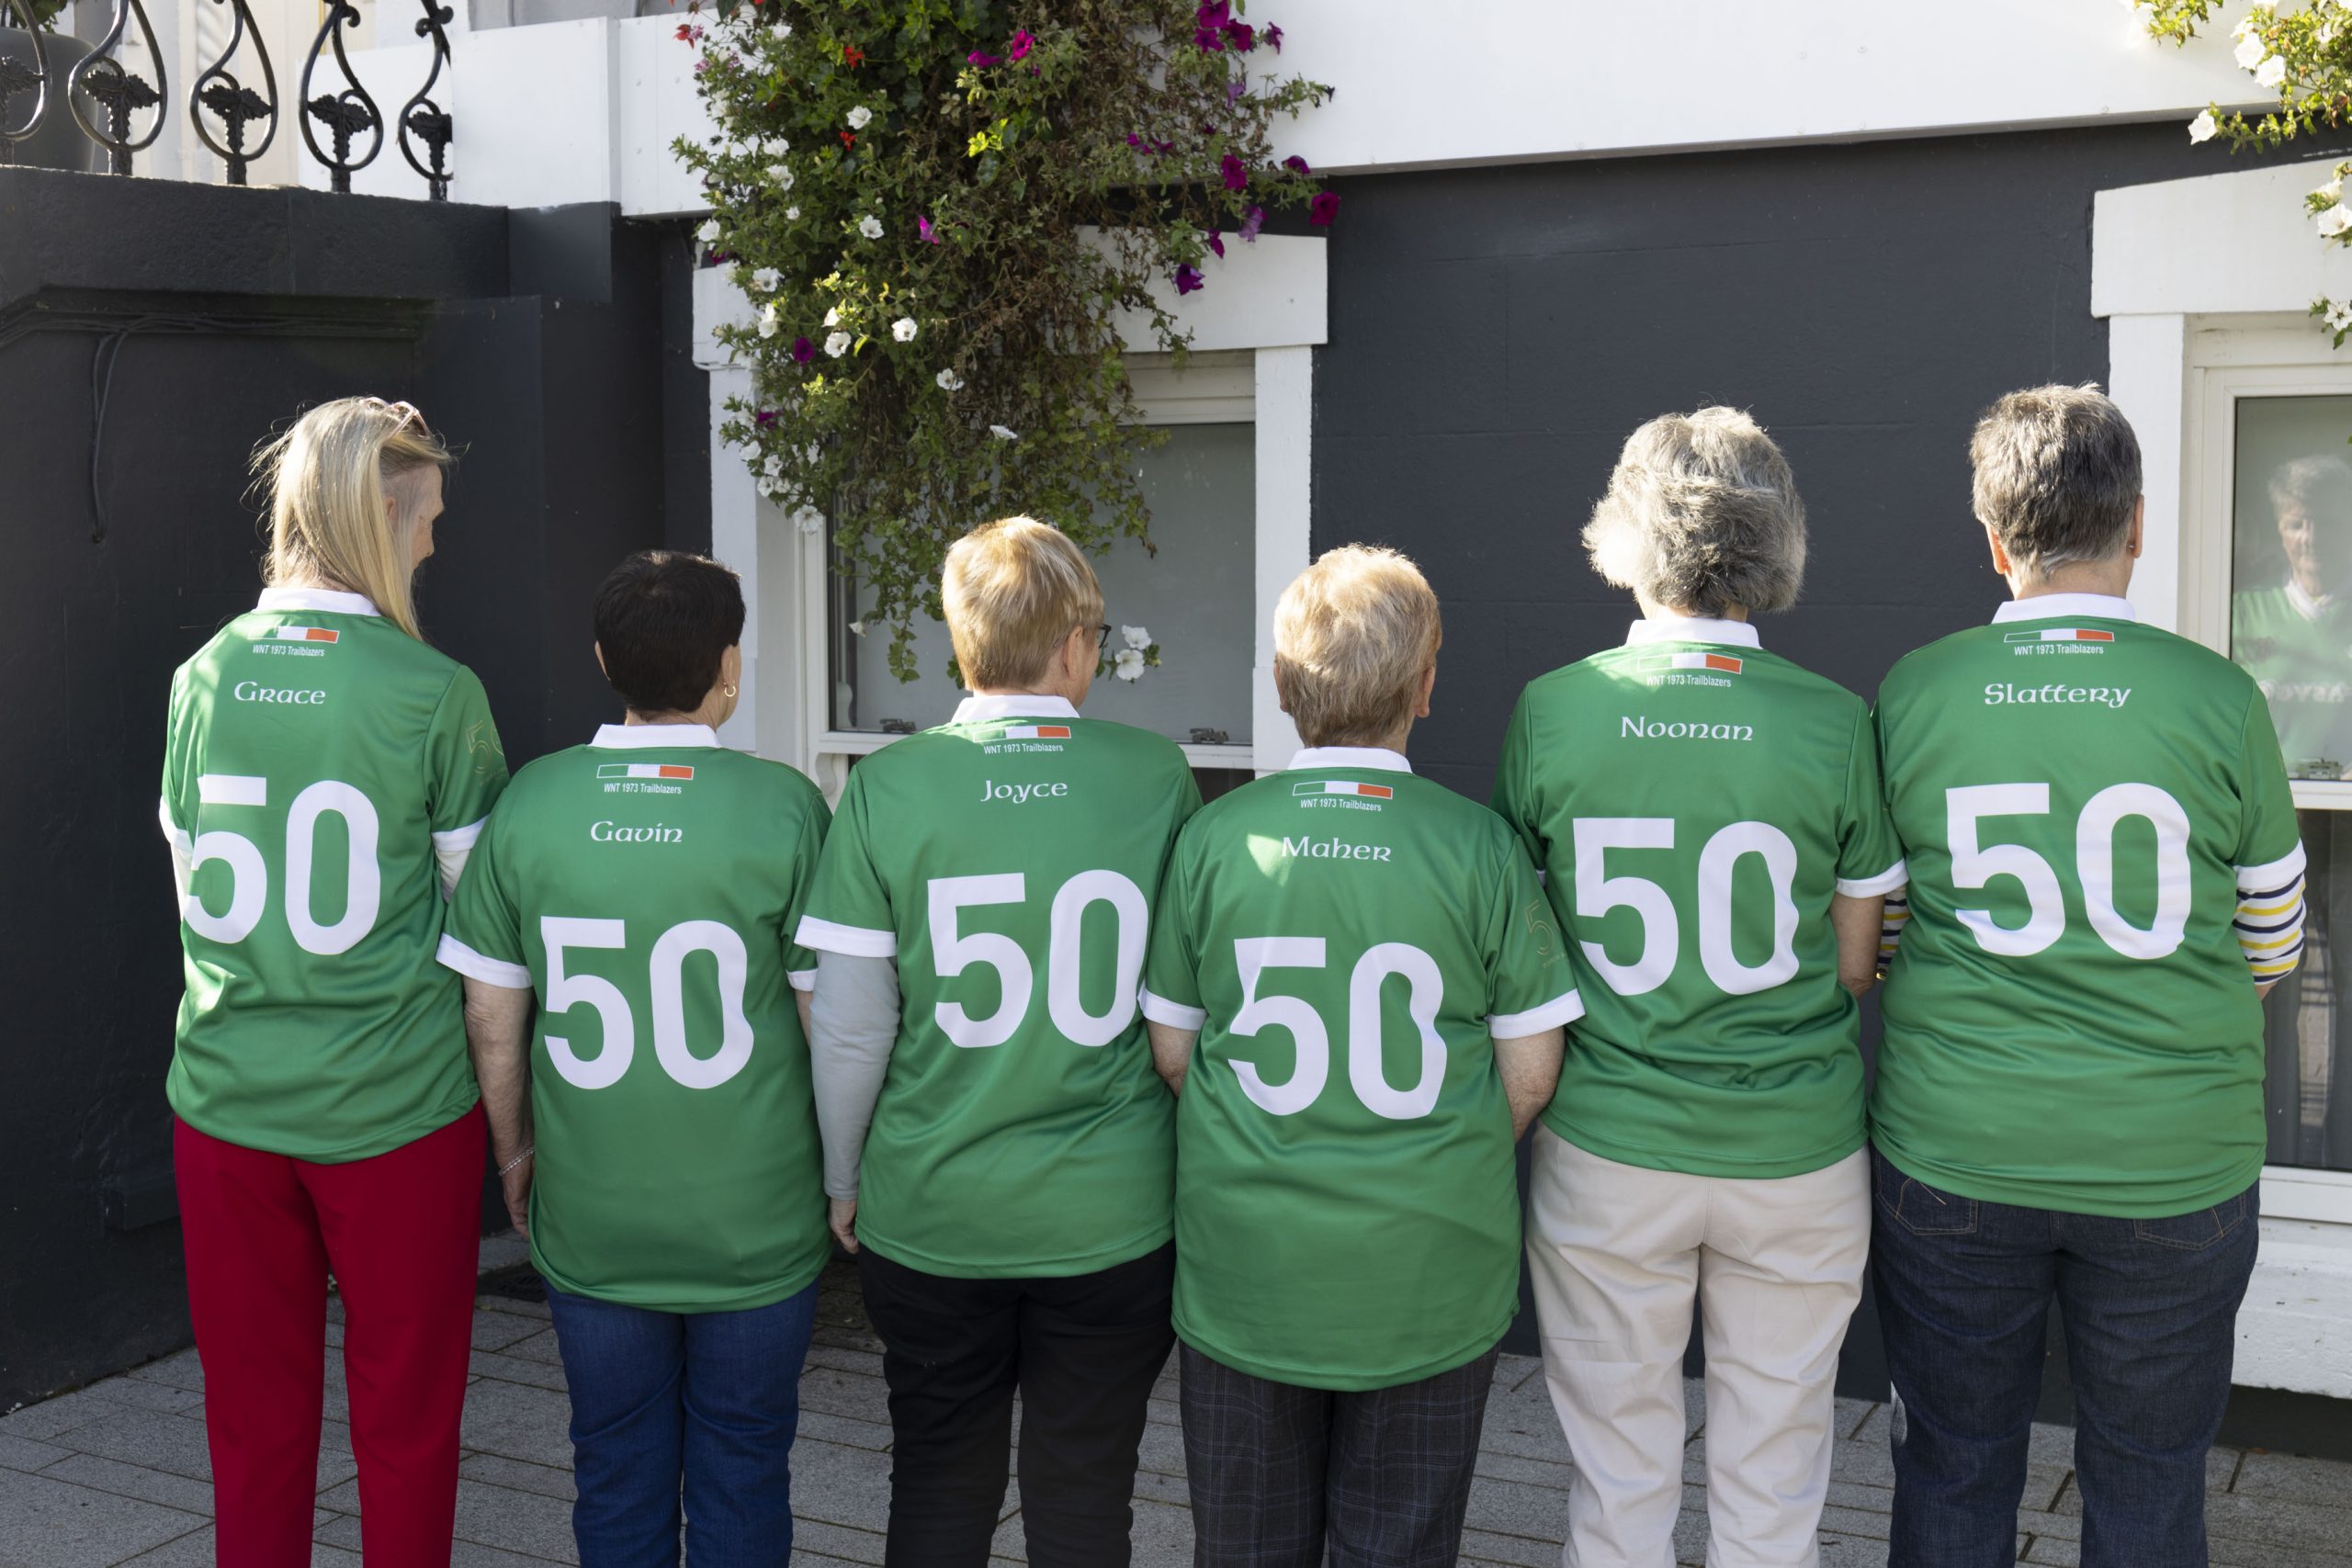 EasyGo presents the 1973 Irish Women’s National team with commemorative jerseys with an image of the jersey